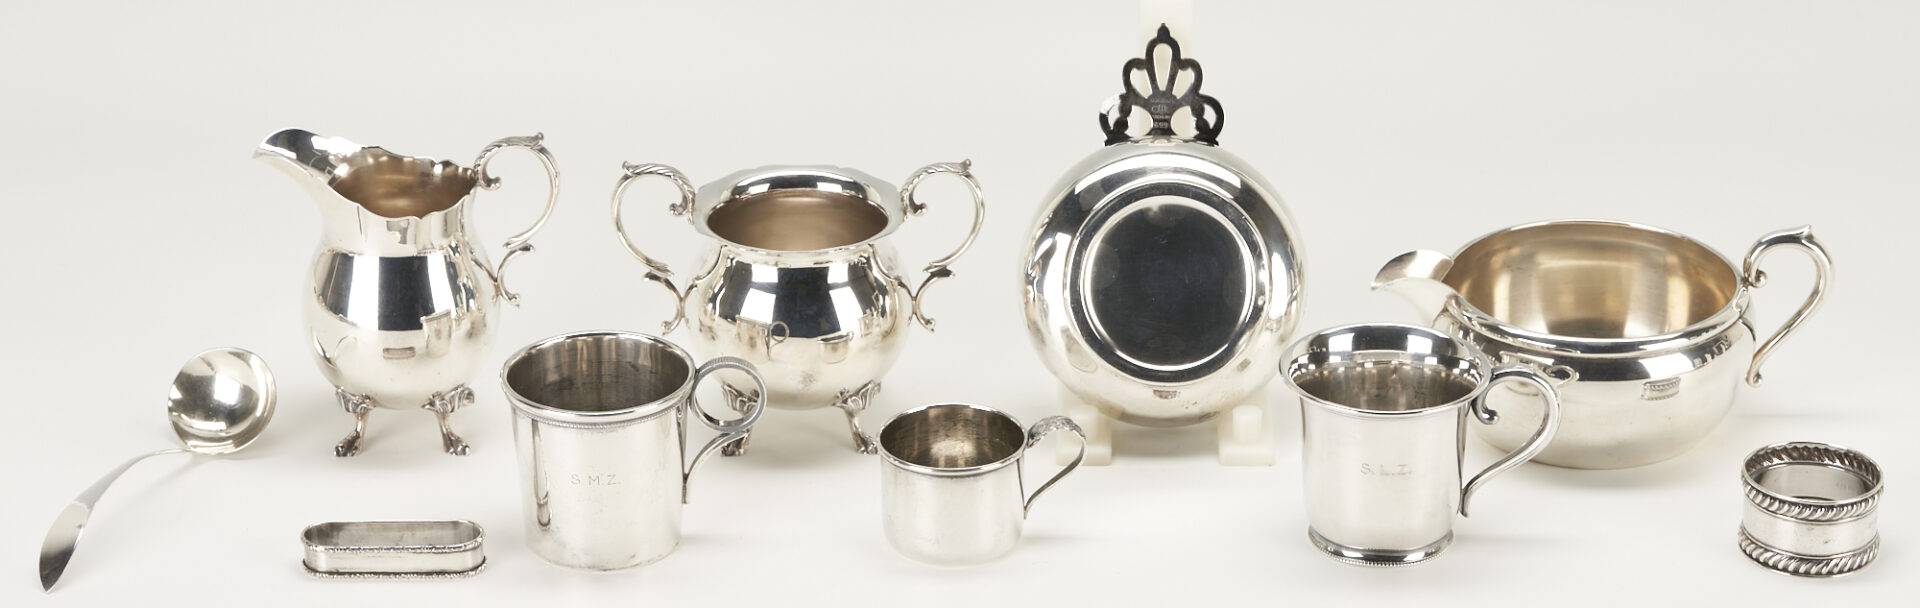 Lot 676: 16 pcs. Assd. Sterling Silver, Mostly Hollowware